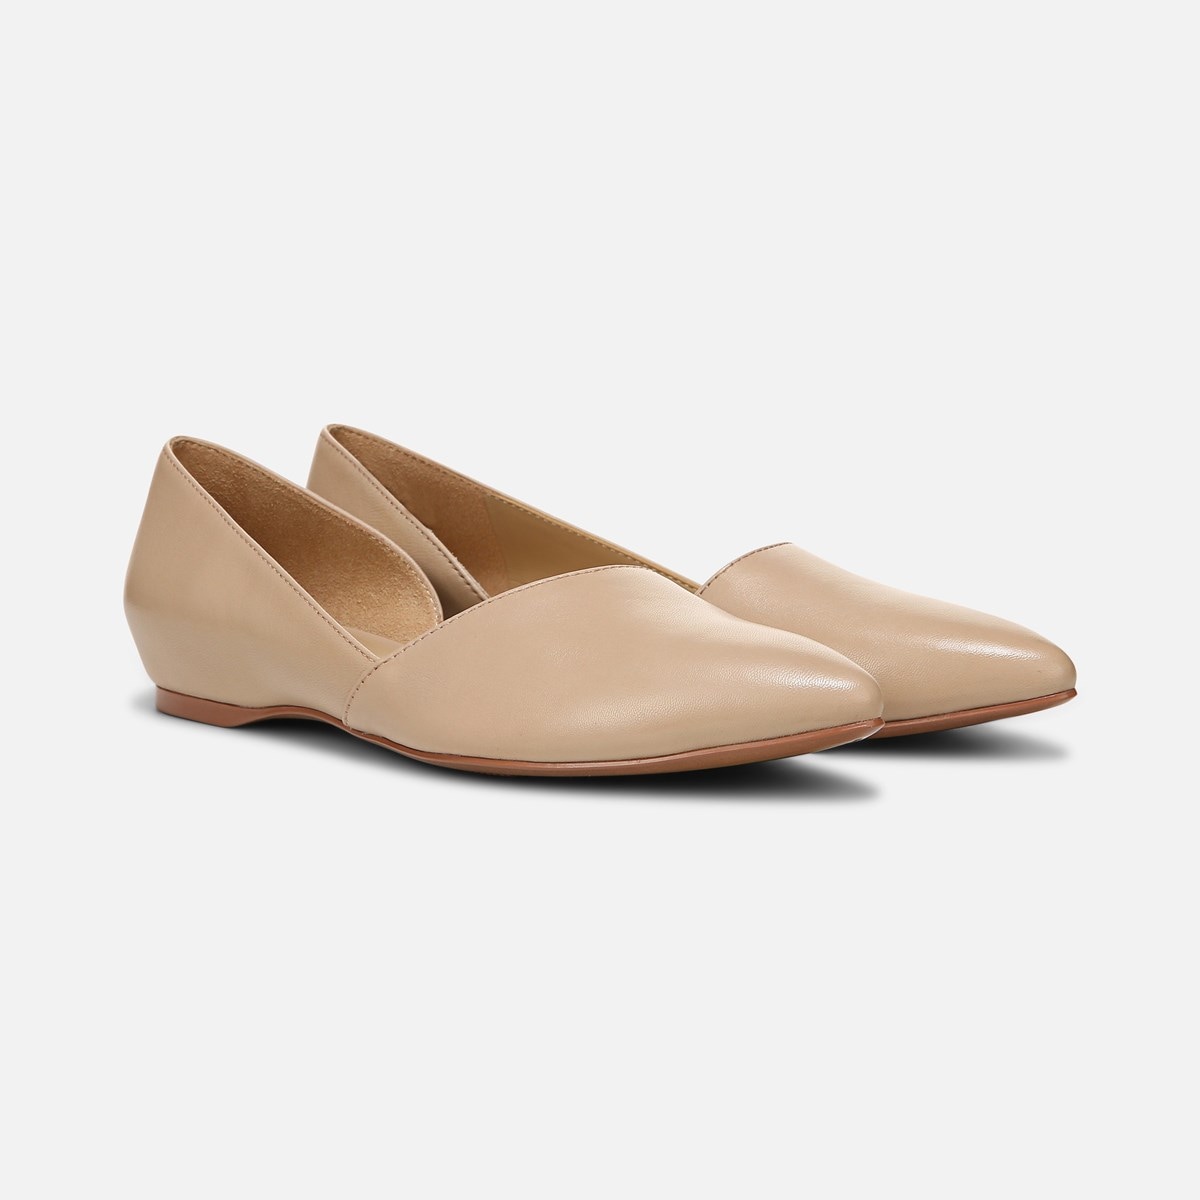 Naturalizer Samantha in Taupe Leather 